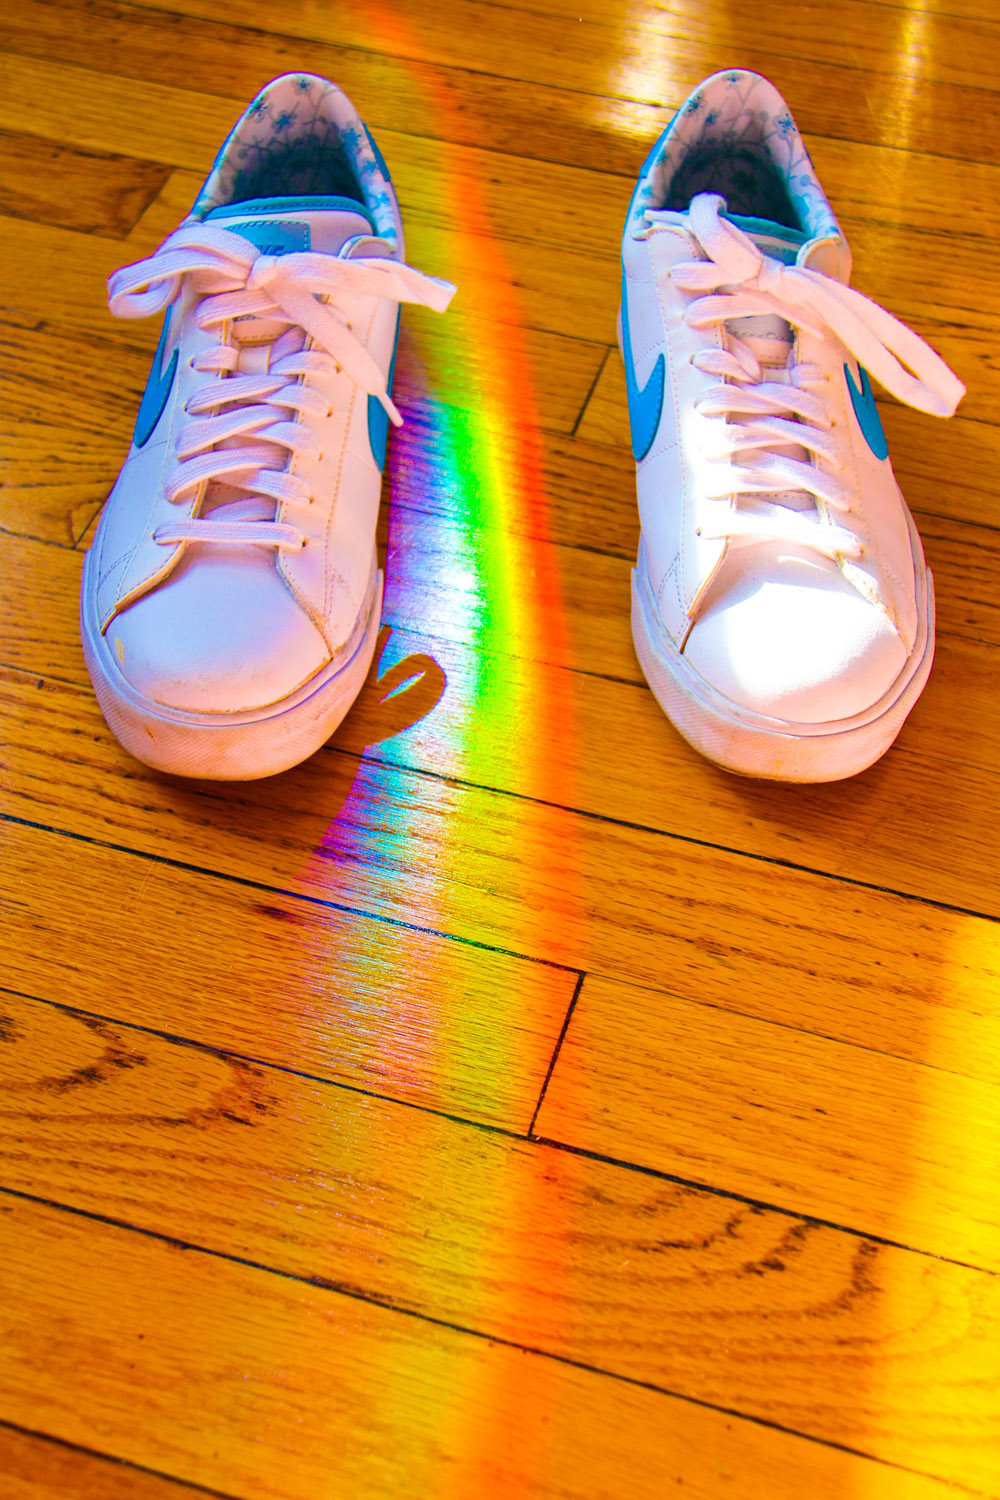 prisms, rainbows, and Nikes